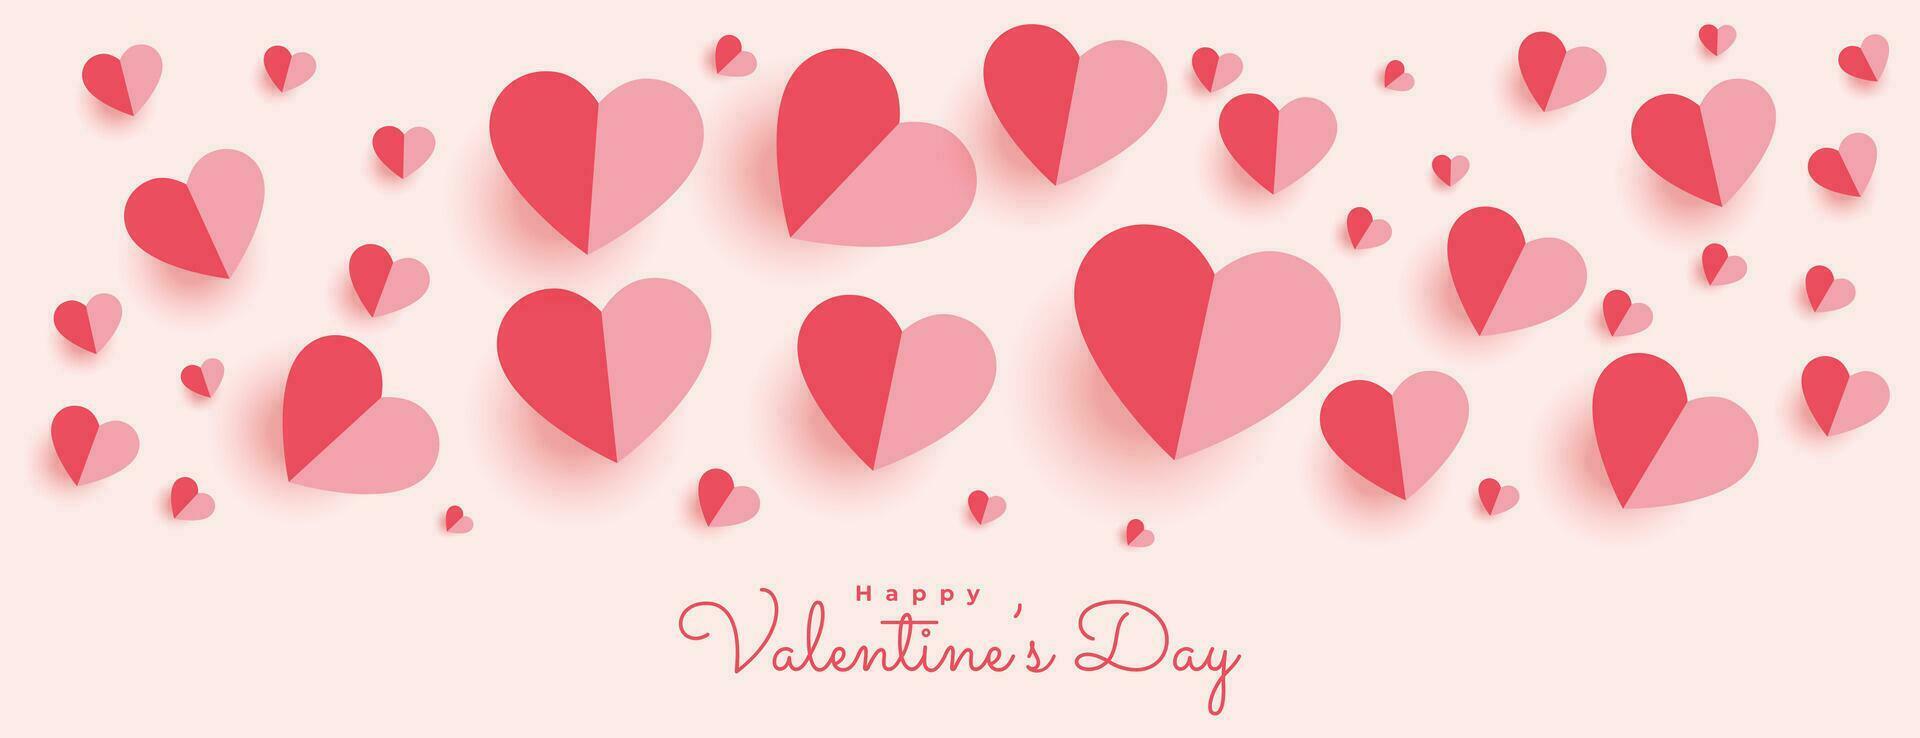 lovely paper hearts banner for valentines day vector